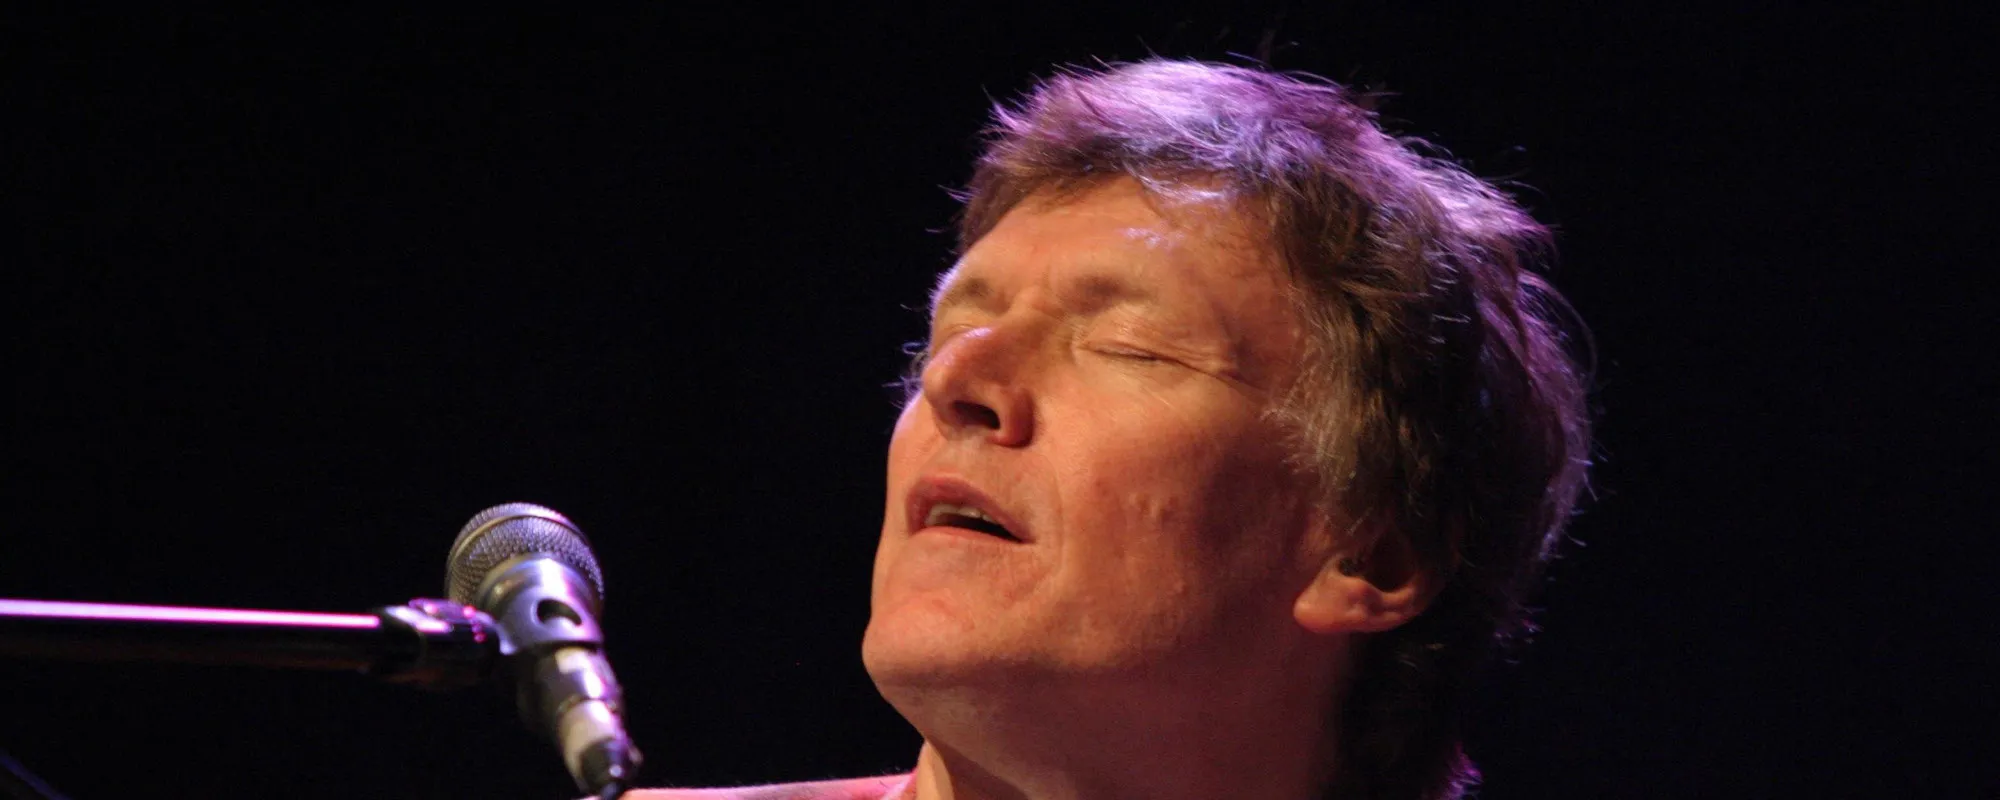 Behind the Album: How Steve Winwood Became a Solo Star with ‘Arc of a Diver’